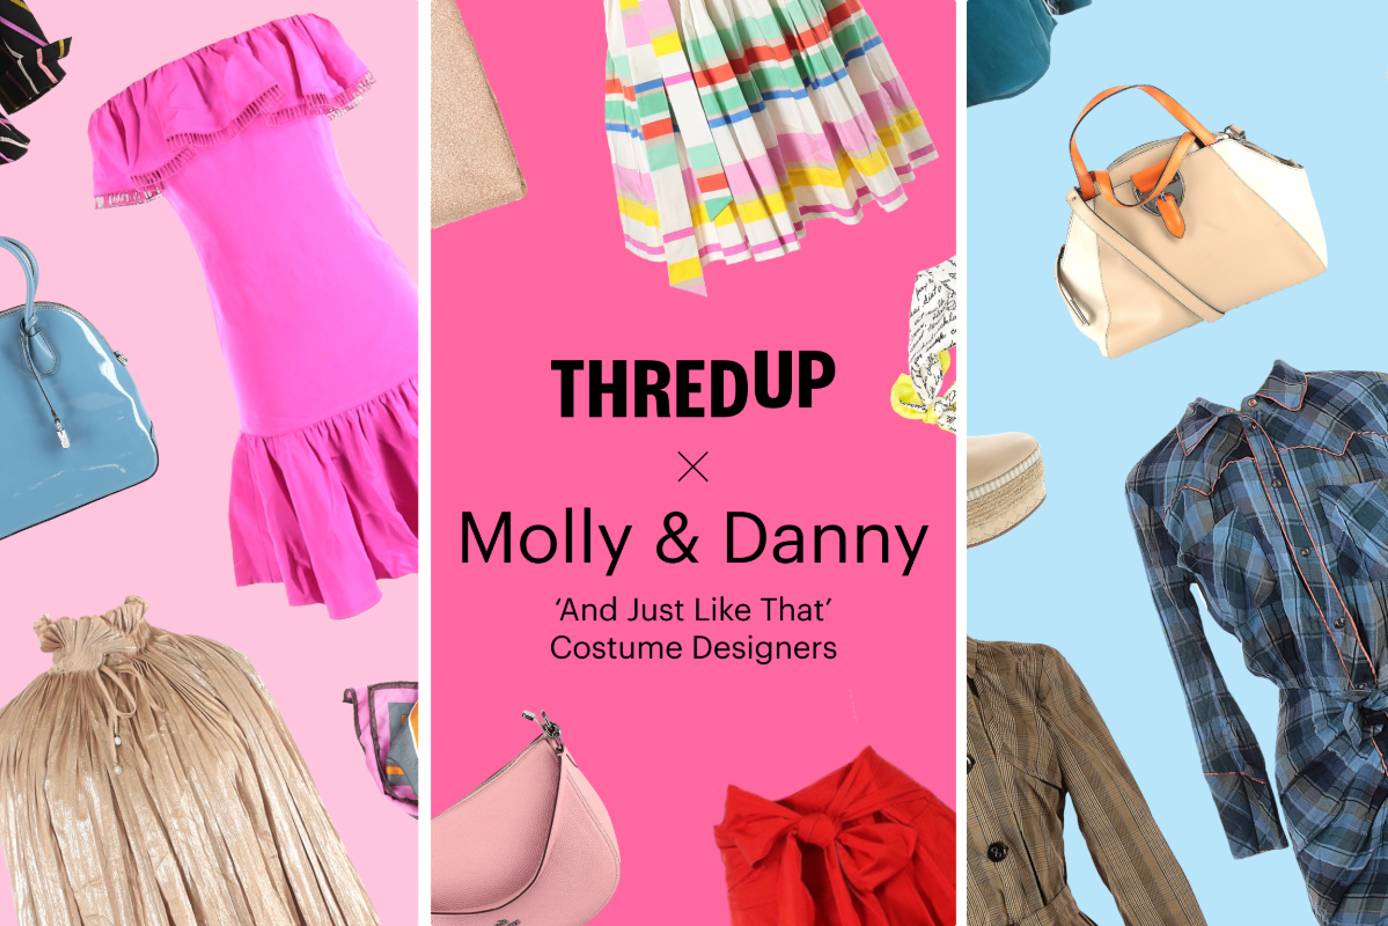 And Just Like That Costume Designers: Shop Carrie Bradshaw's Style on  ThredUp